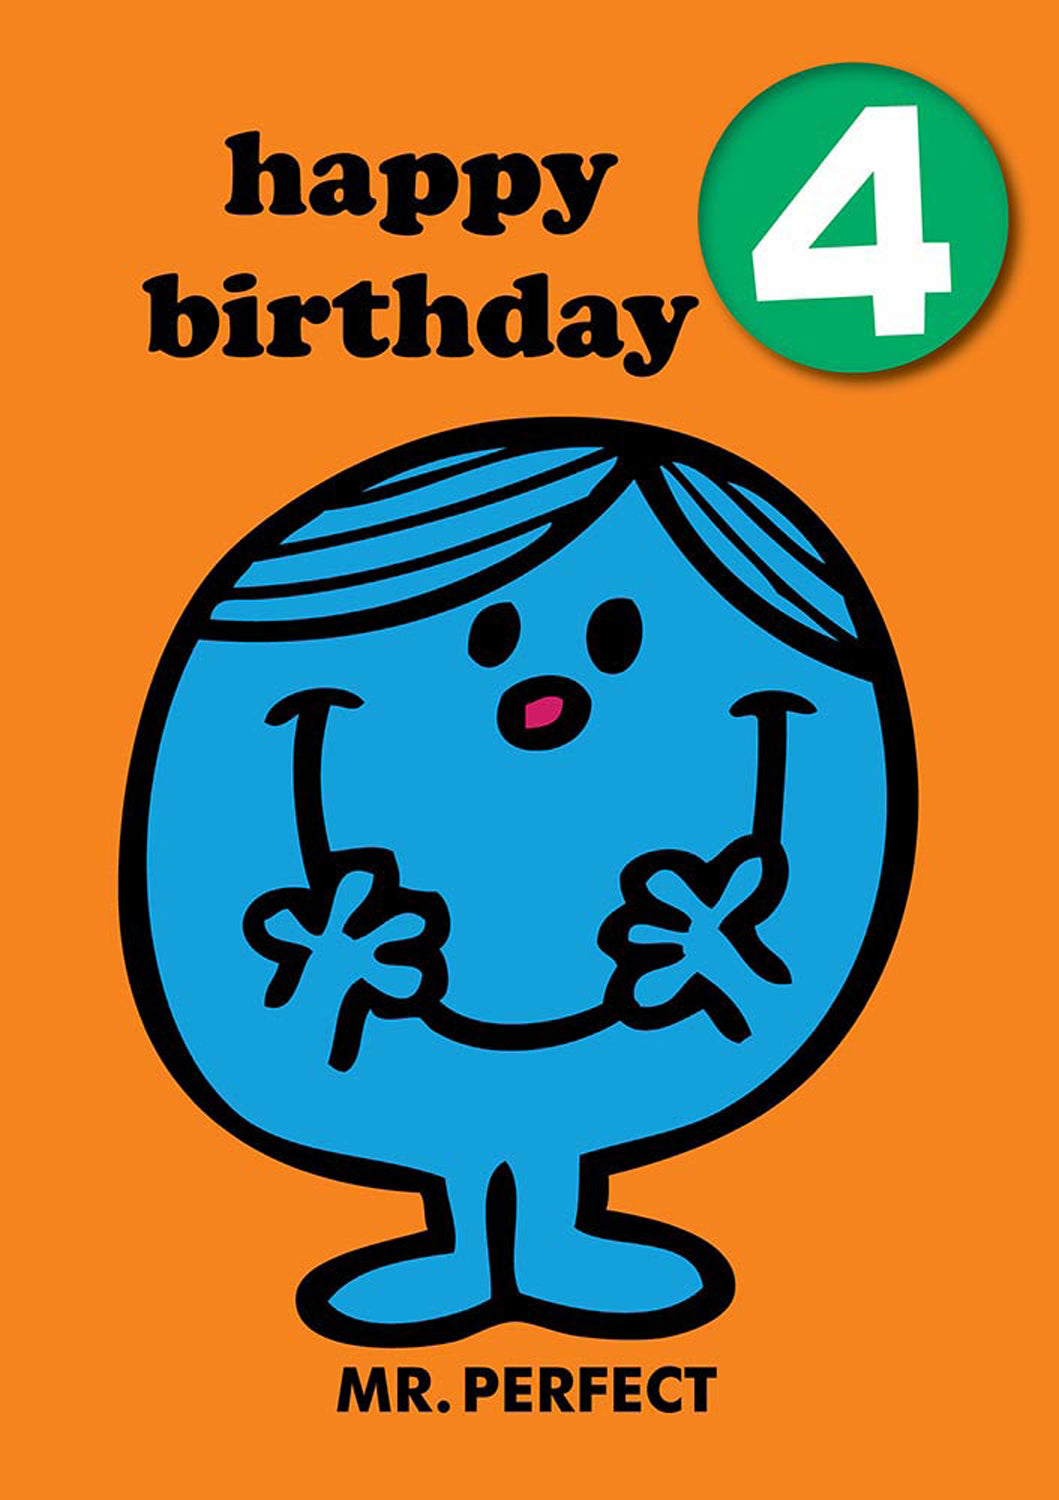 Greeting Card: Mr. Men and Little Miss - Mr. Perfect Age 4 Badge